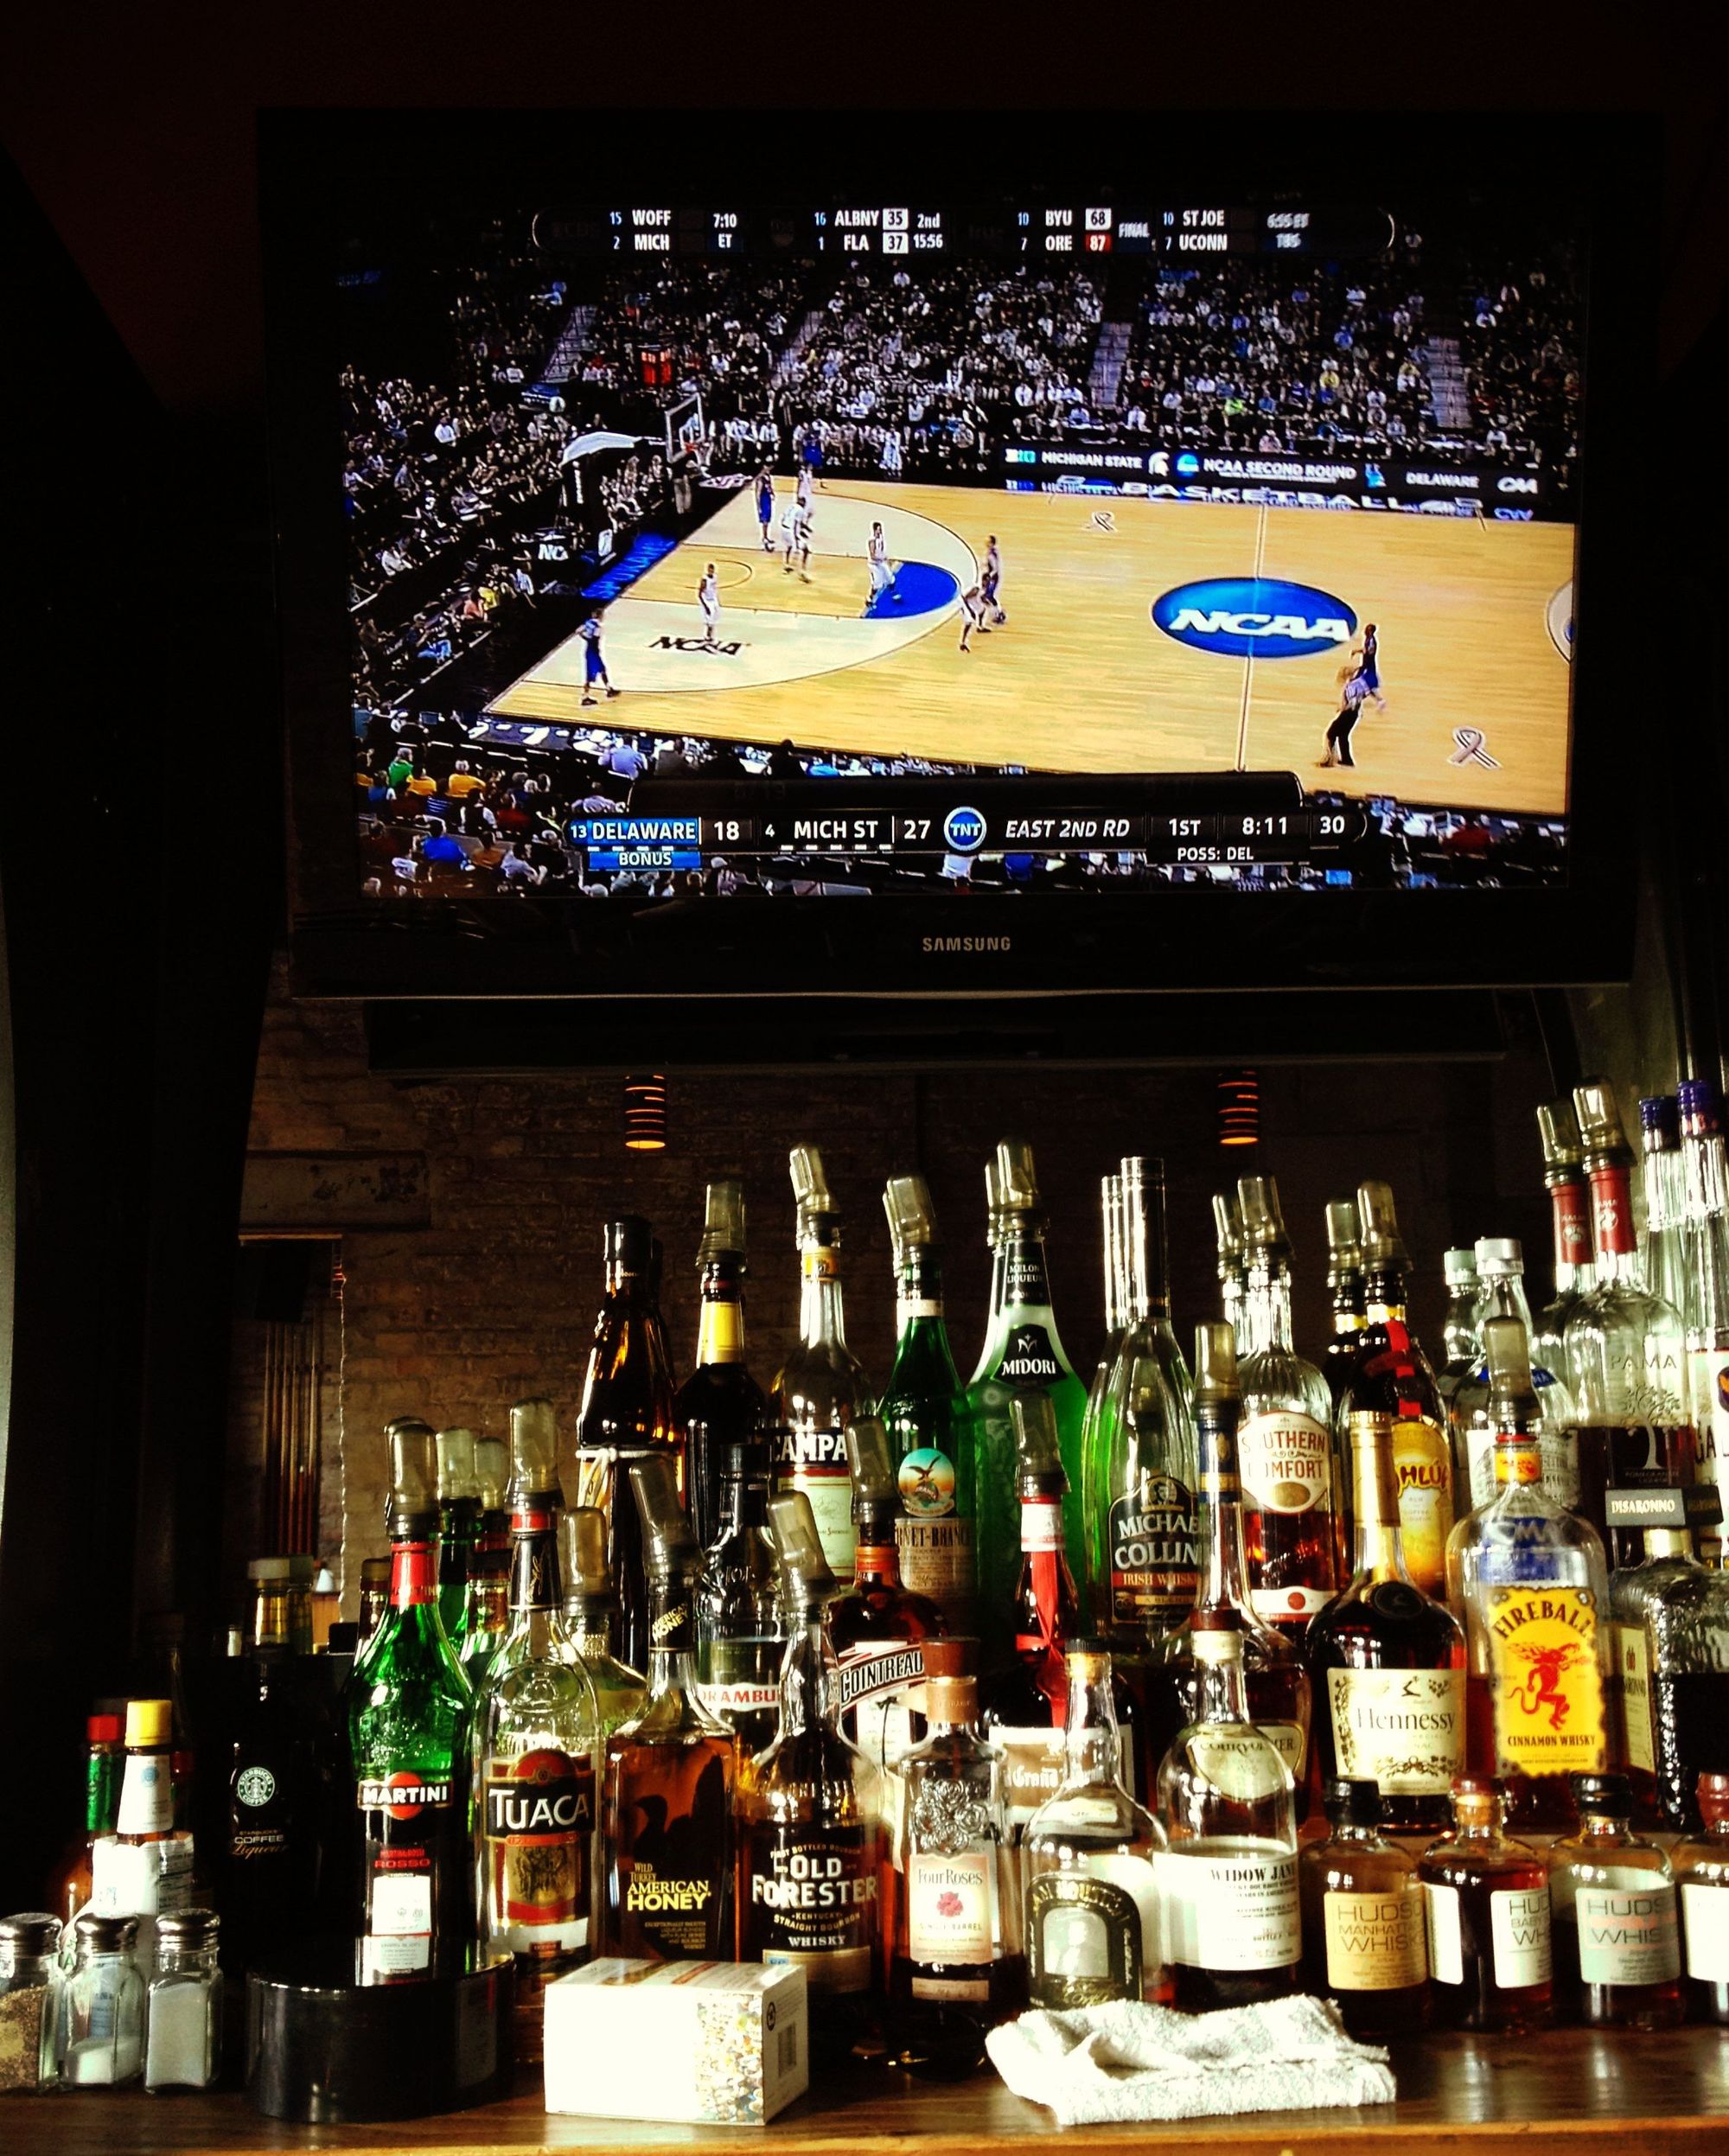 Where To Watch March Madness Games In Park Slope